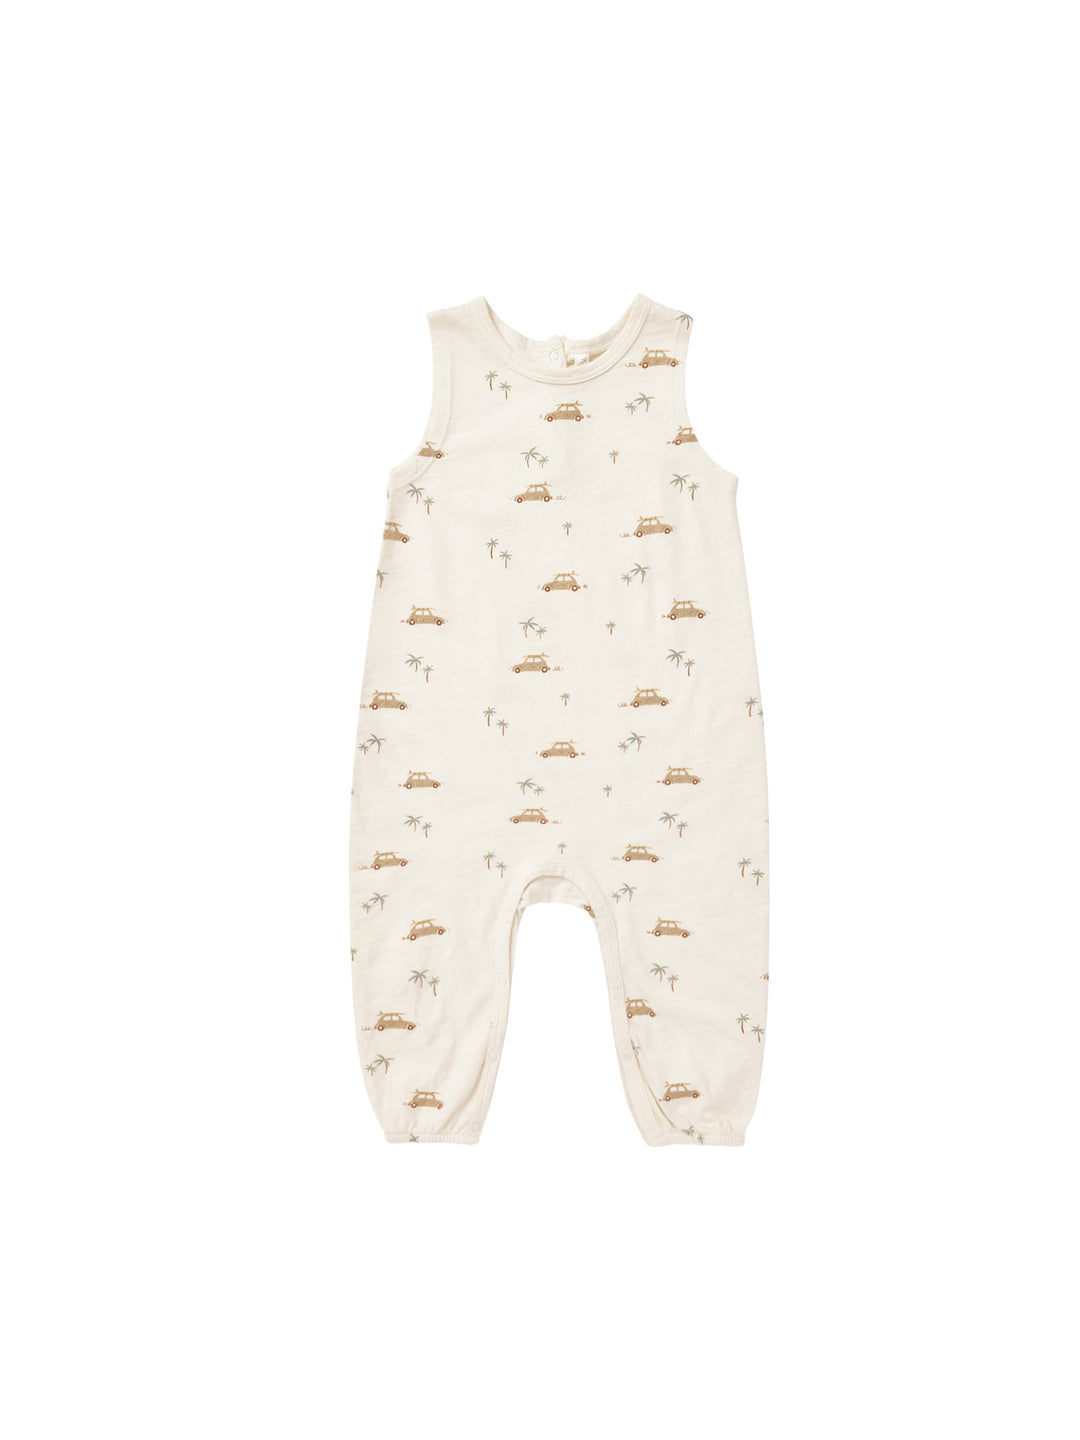 Surf Buggy Jumpsuit by Rylee and Cru